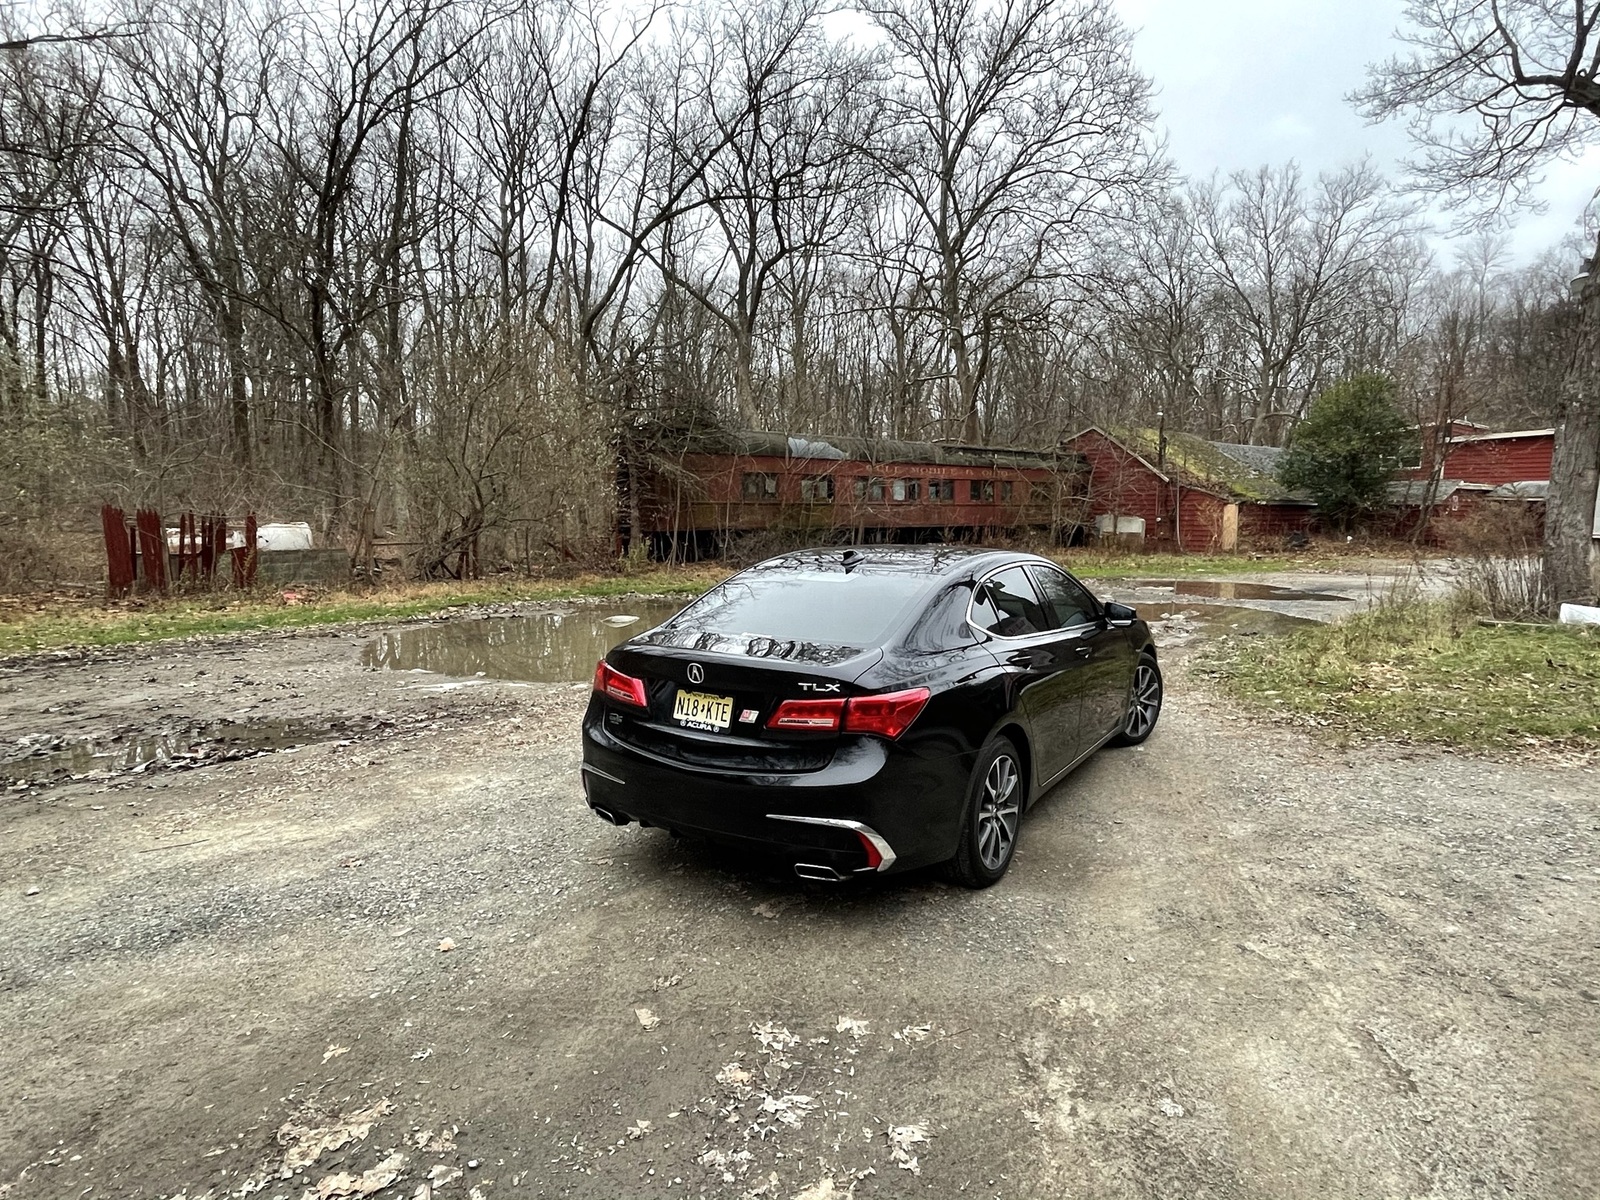 NBP 2019 Acura TL TLX 3.5 PAWS